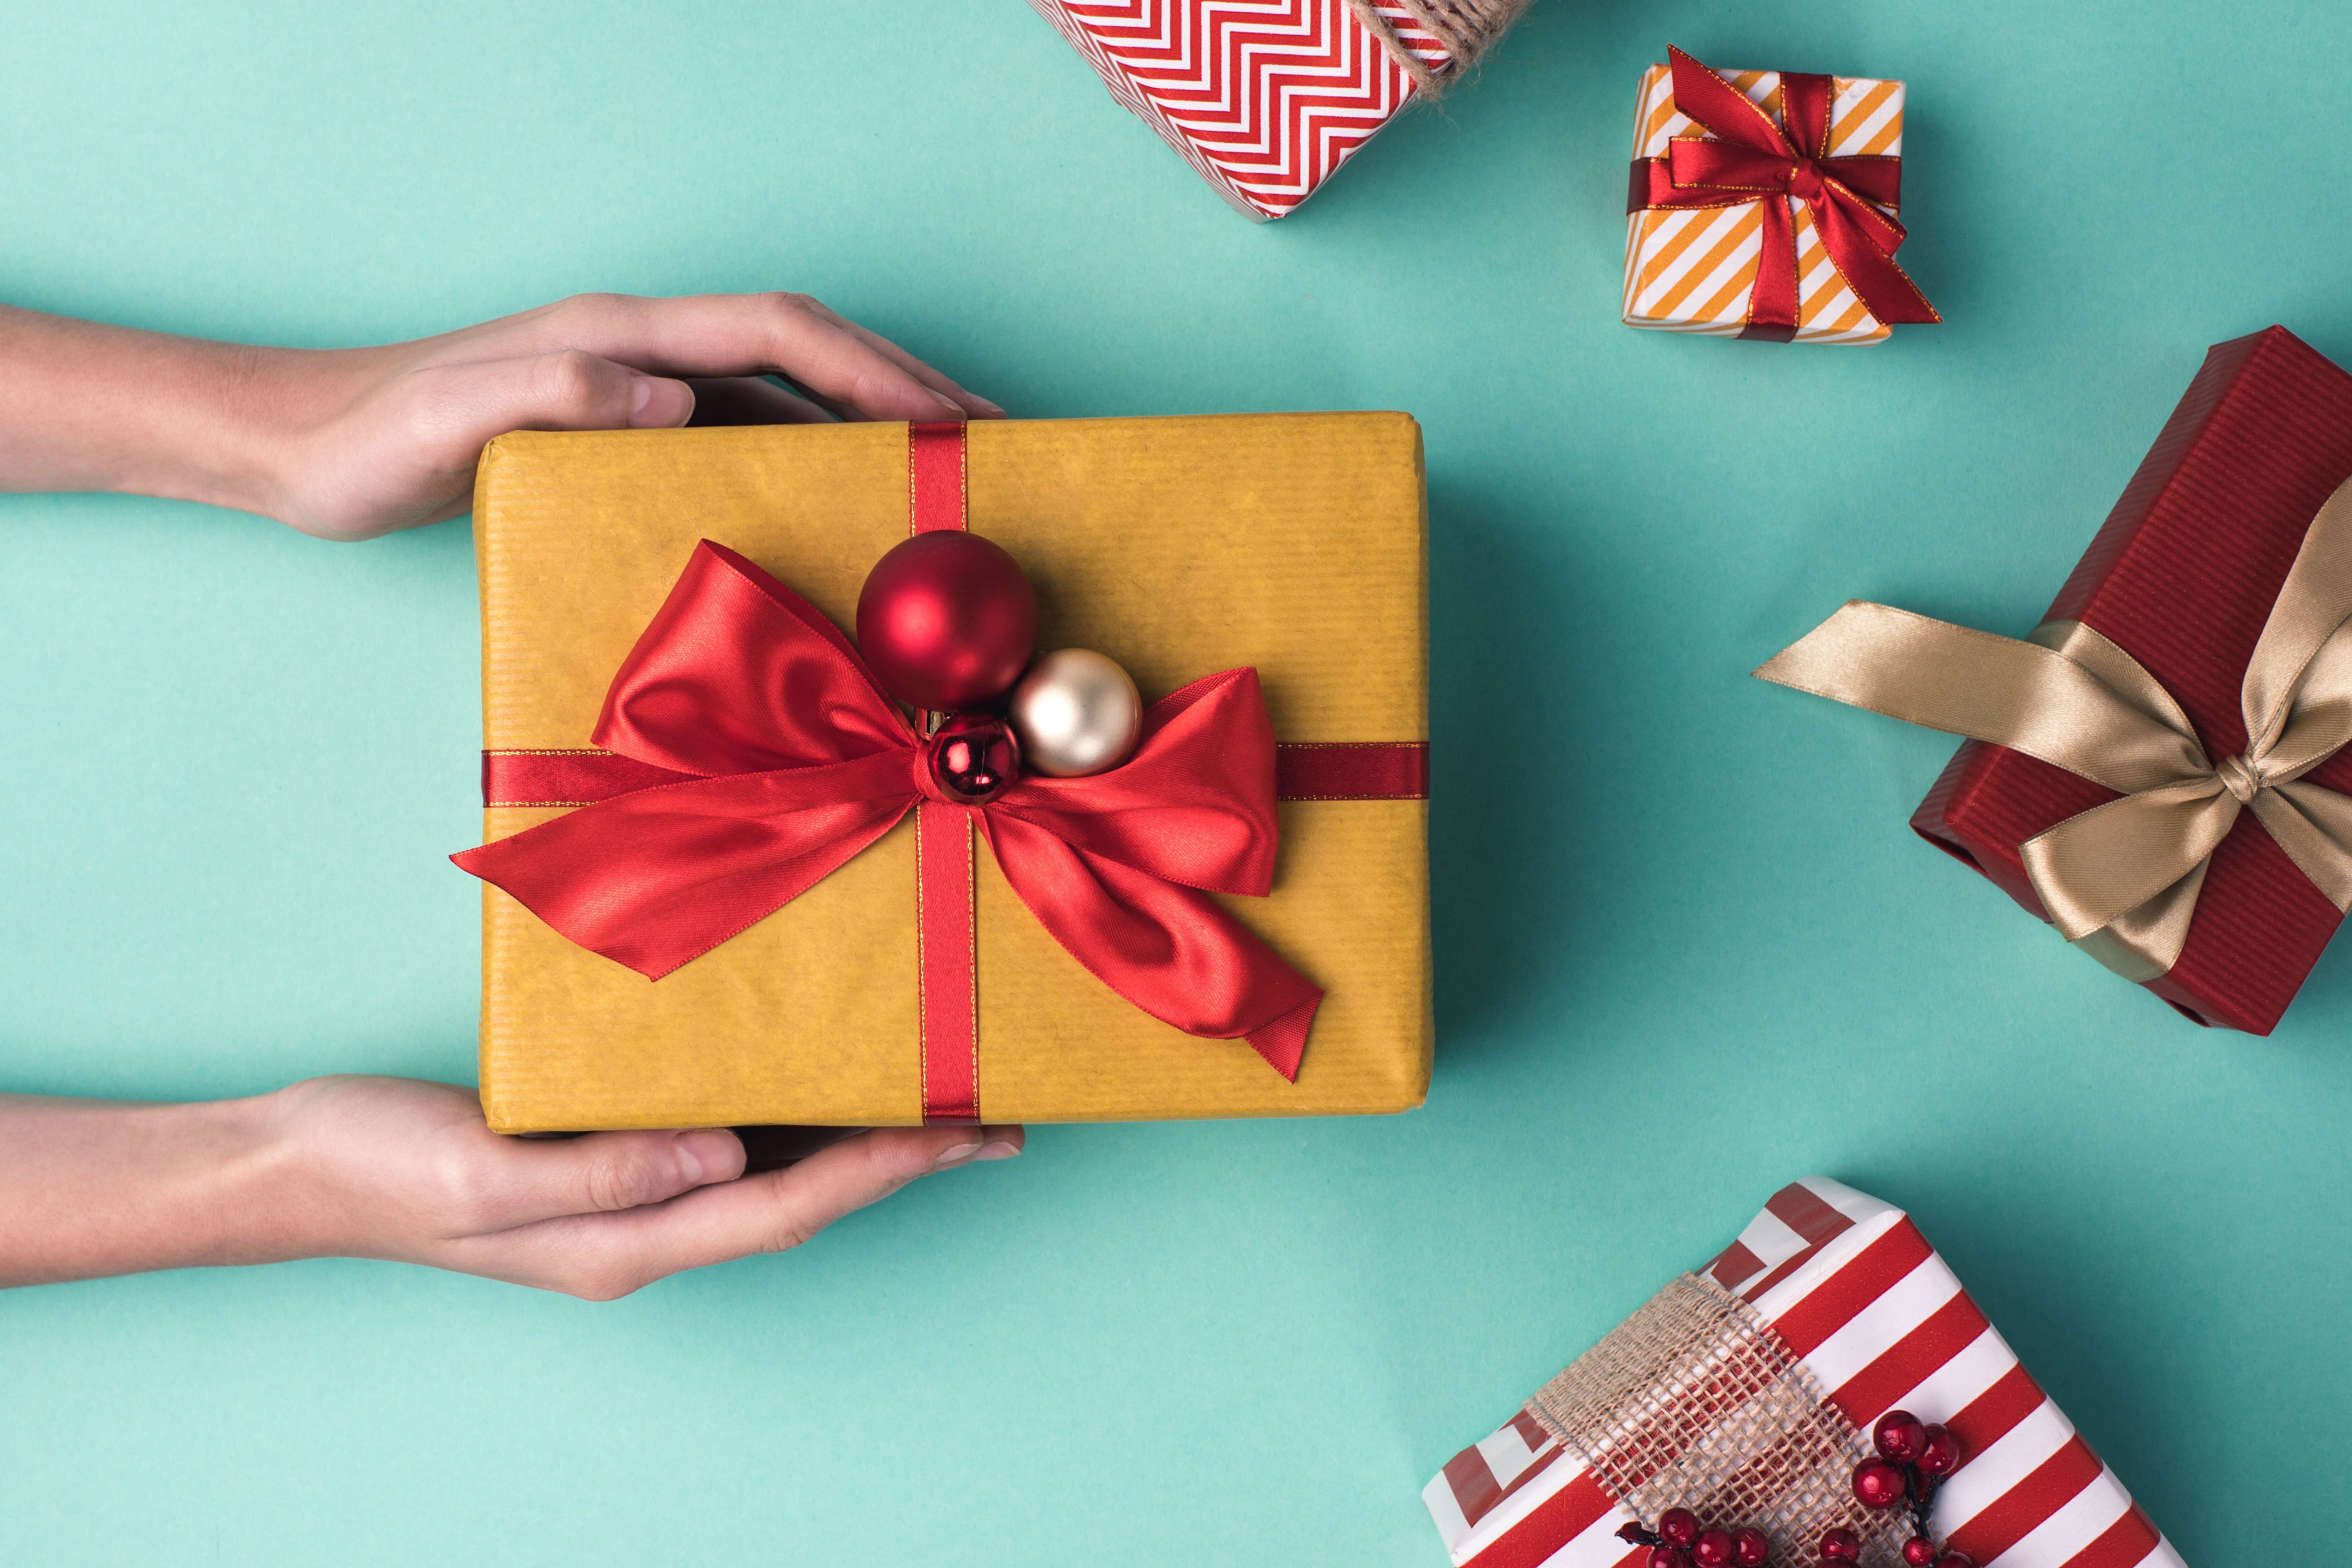 The Gift of Giving – ICA Agency Alliance, Inc.